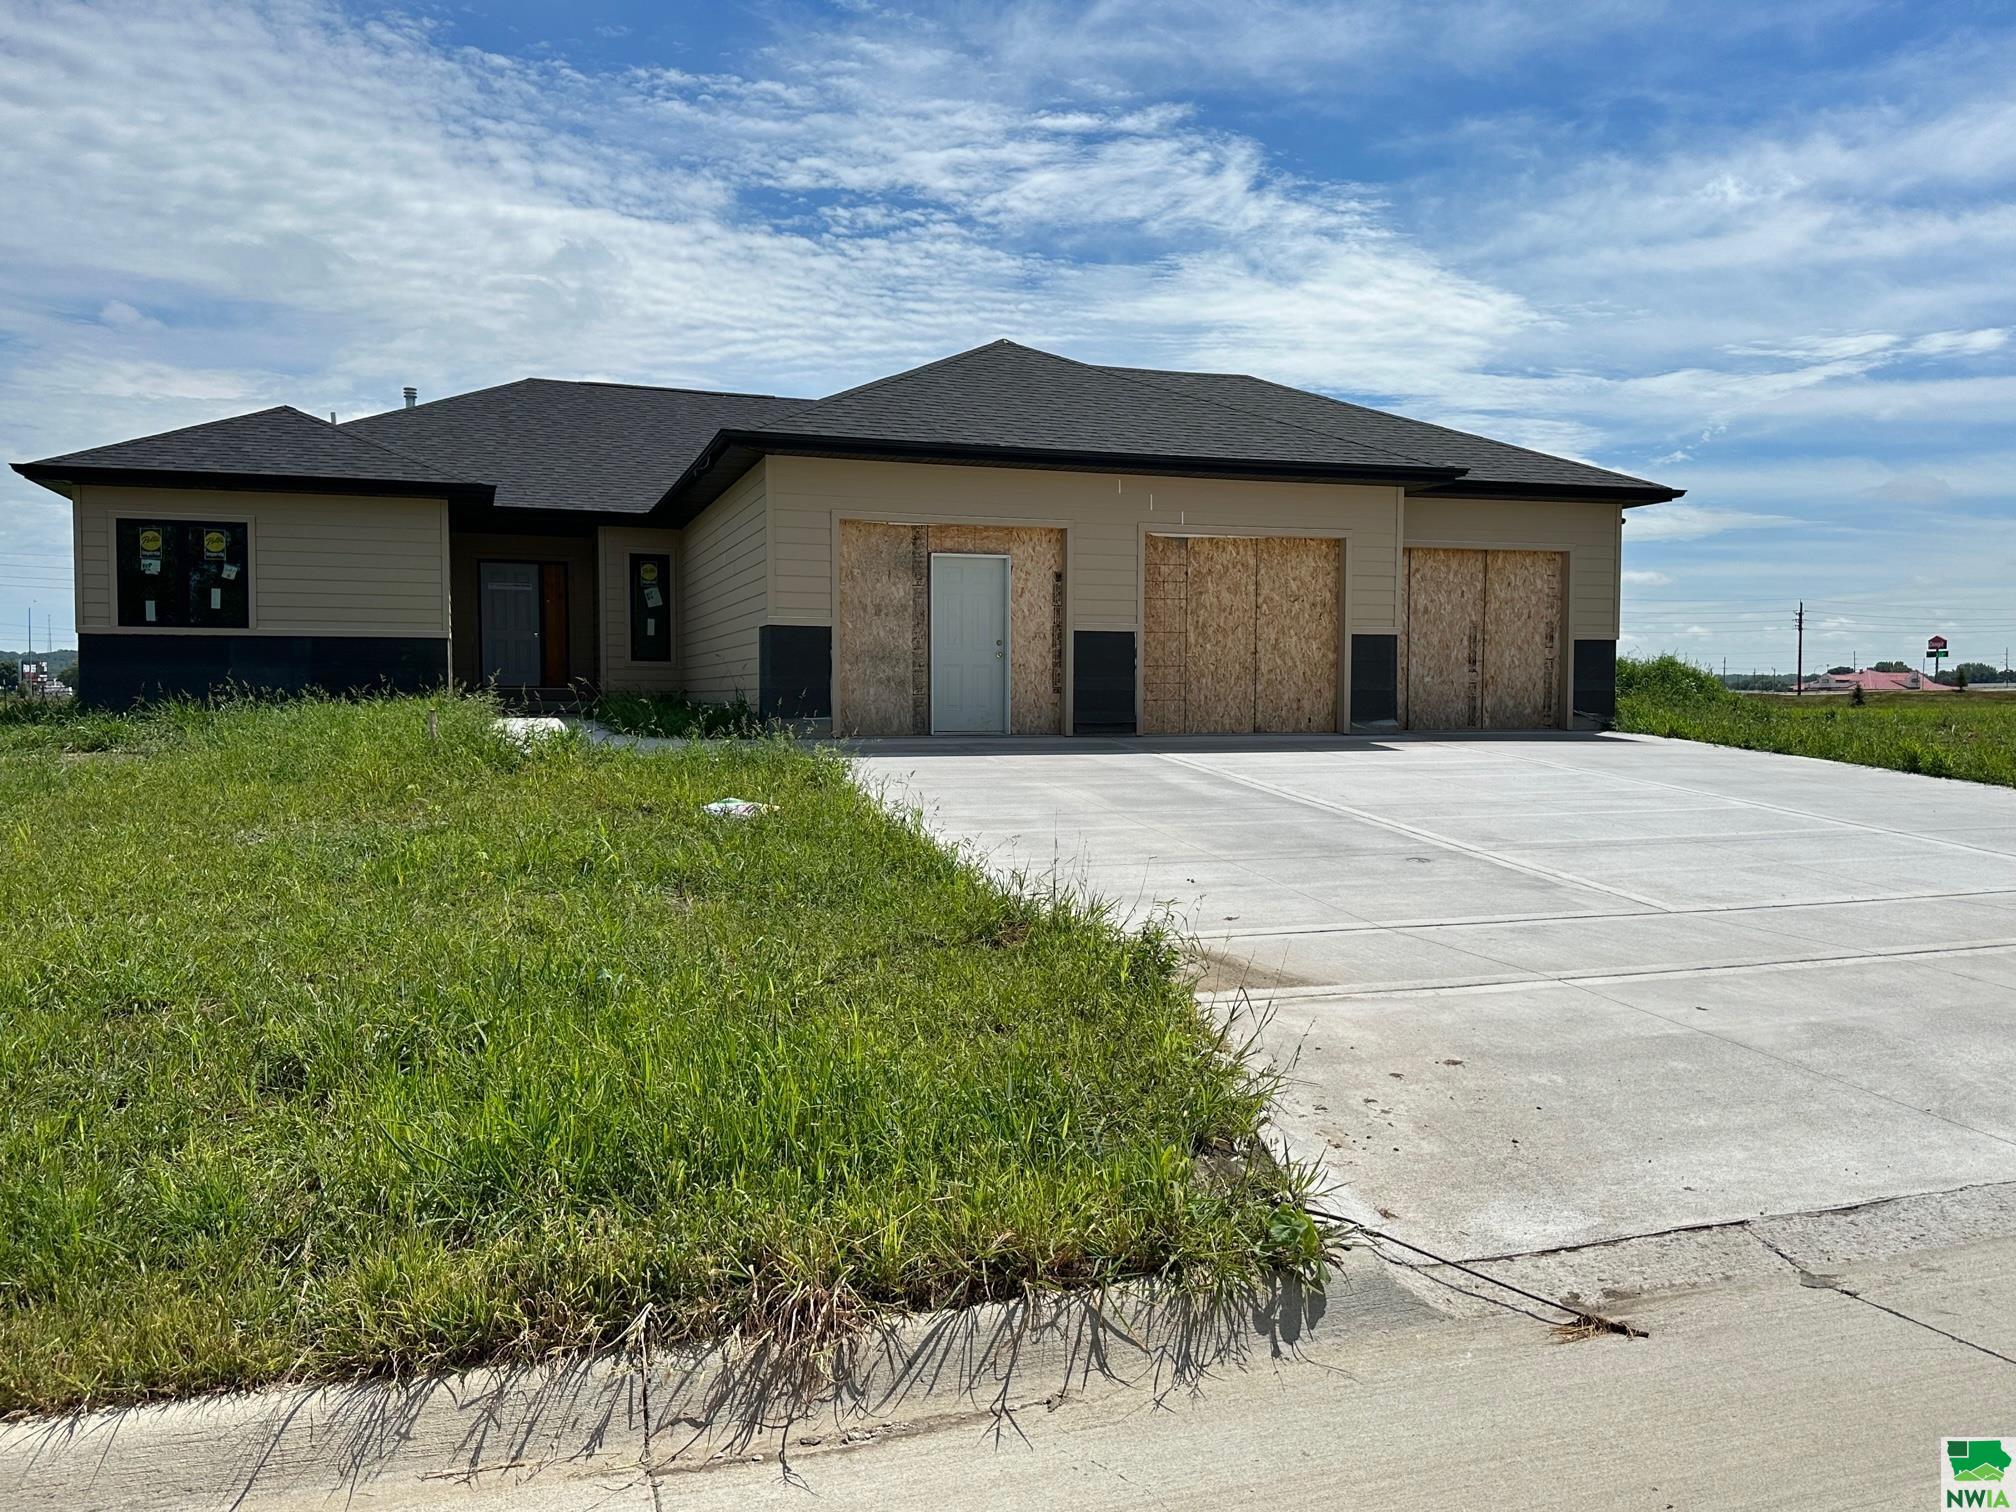 905 Cattail Ct, No. Sioux City, SD 57049 